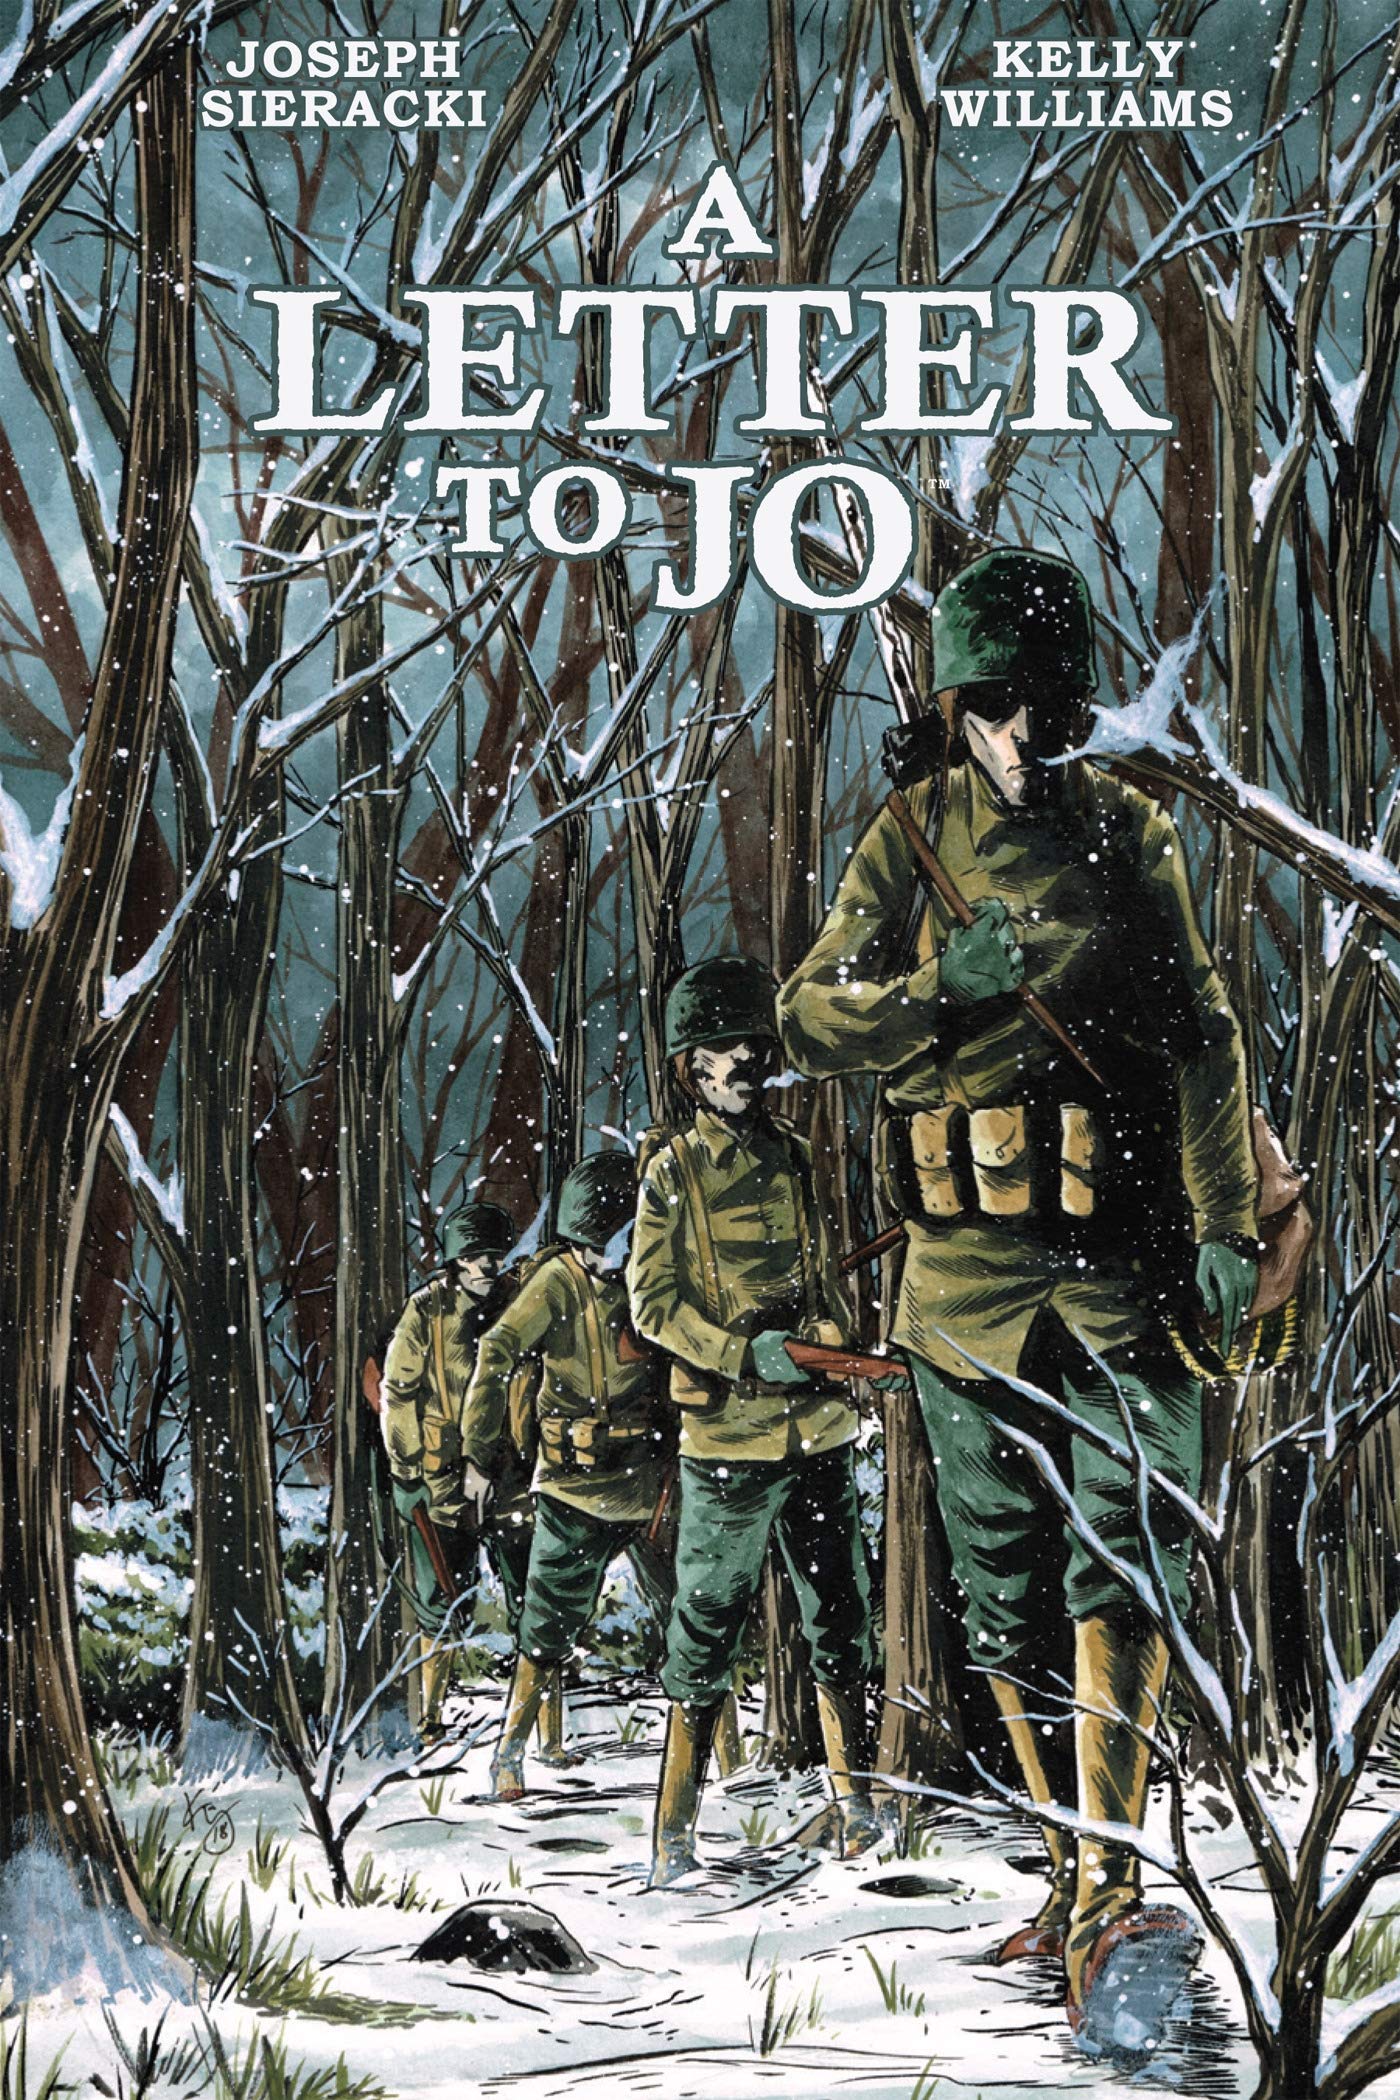 Graphic Novels for Winter 2020: A Letter to Jo